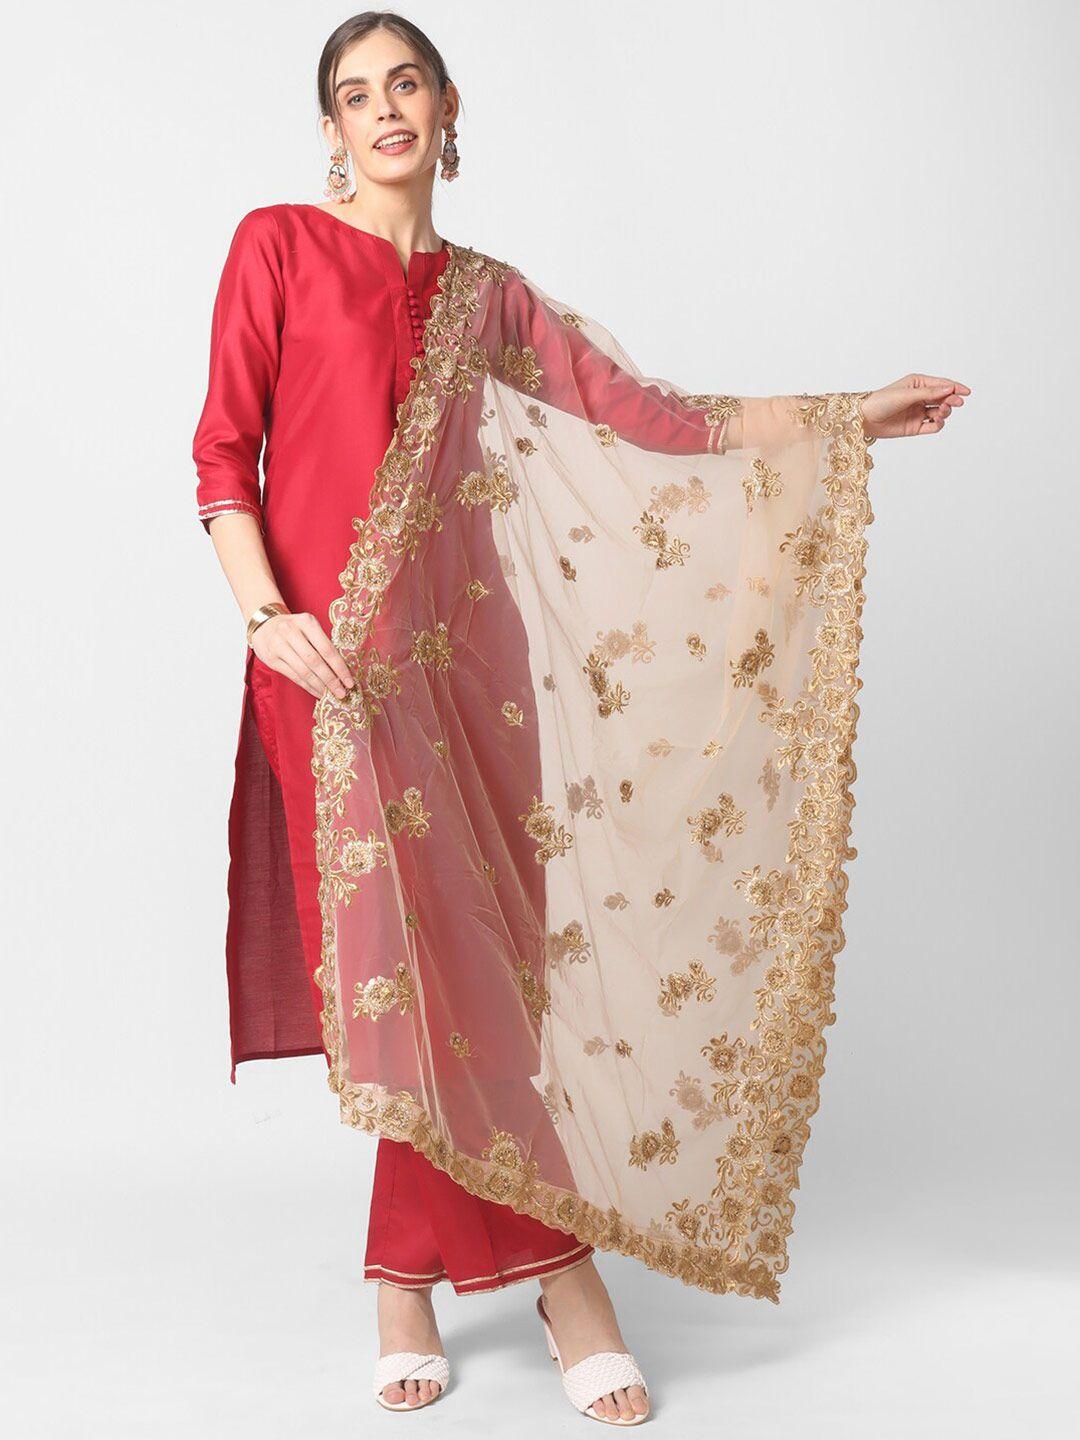 dupatta bazaar gold embroidered dupatta with beads and stones & cutwork details